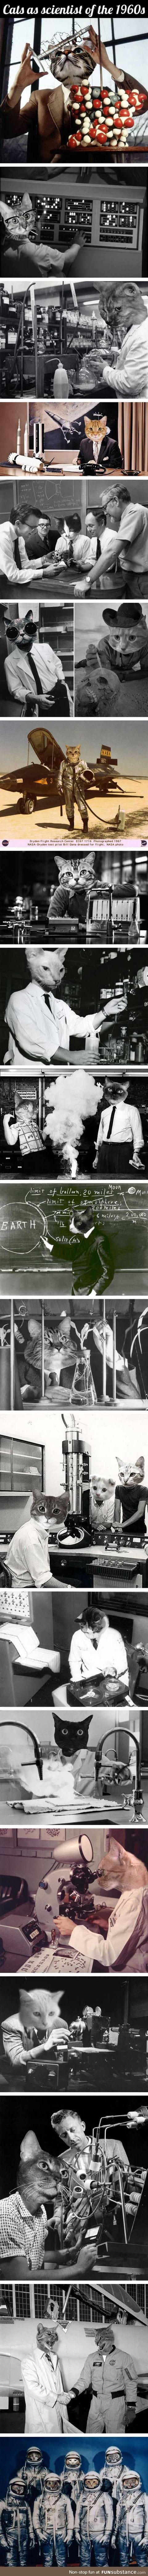 If cats were scientists